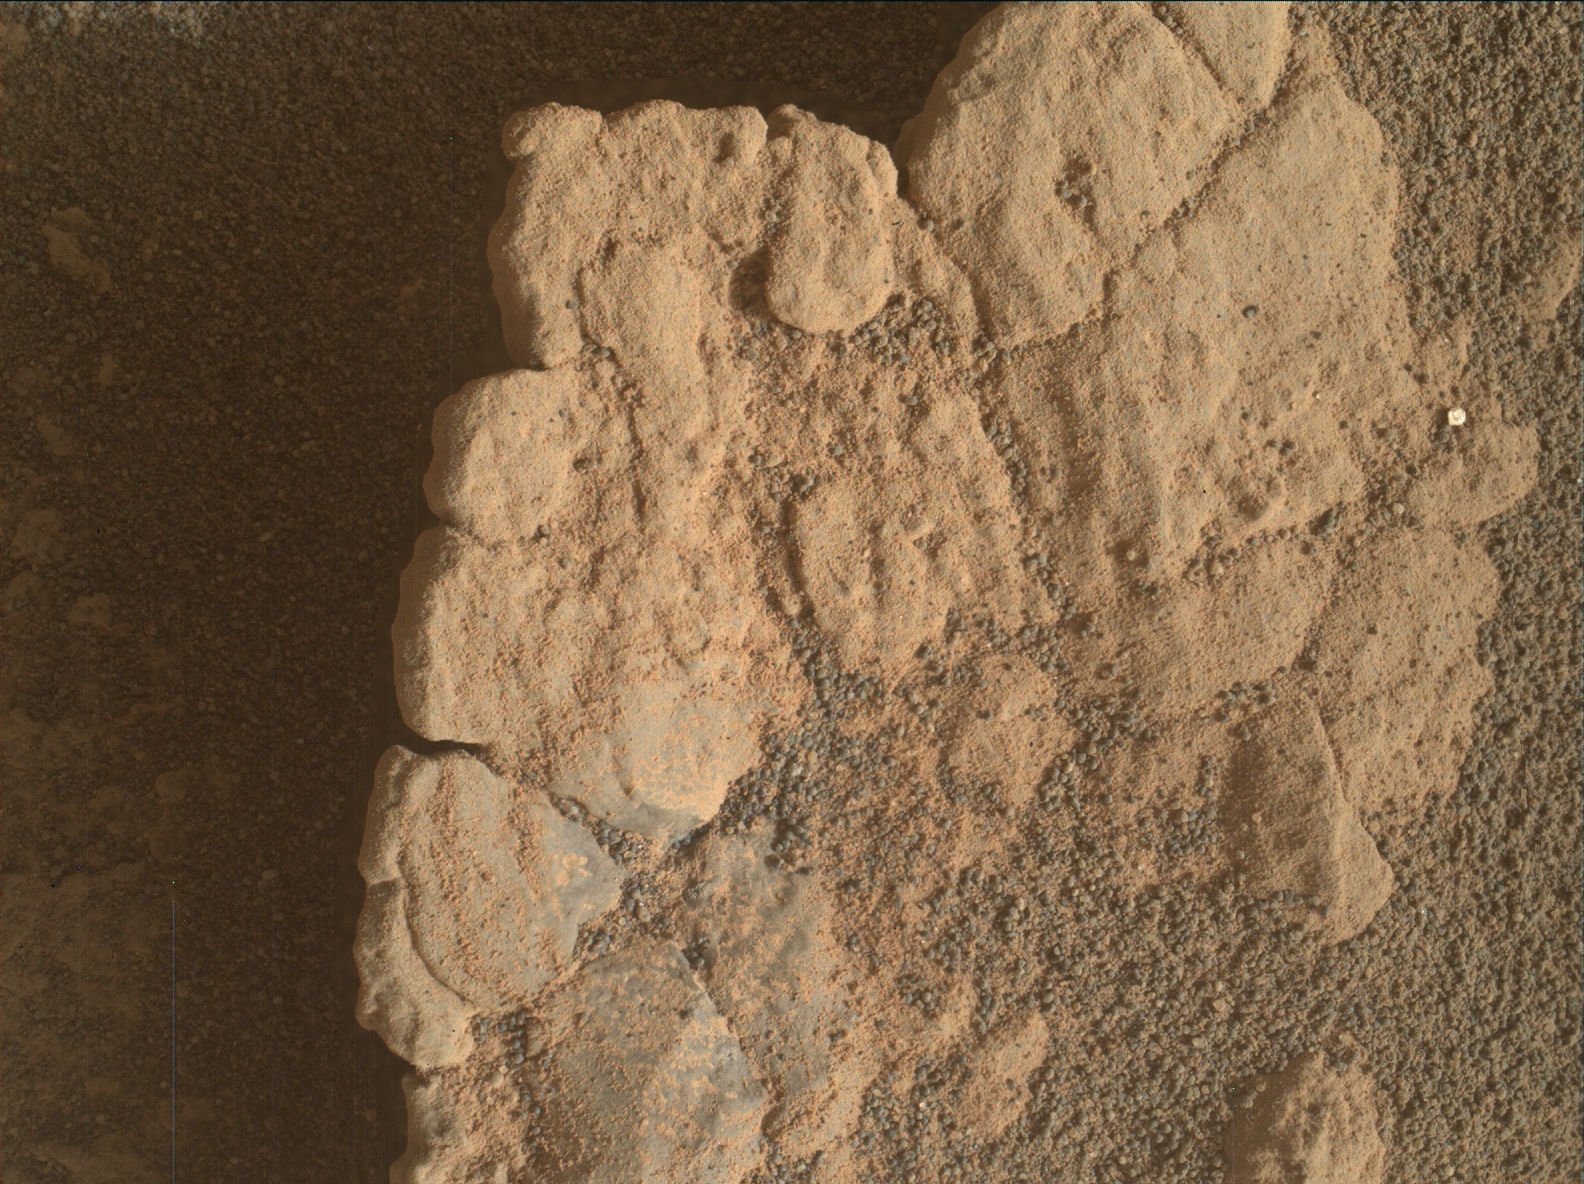 Nasa's Mars rover Curiosity acquired this image using its Mars Hand Lens Imager (MAHLI) on Sol 3399